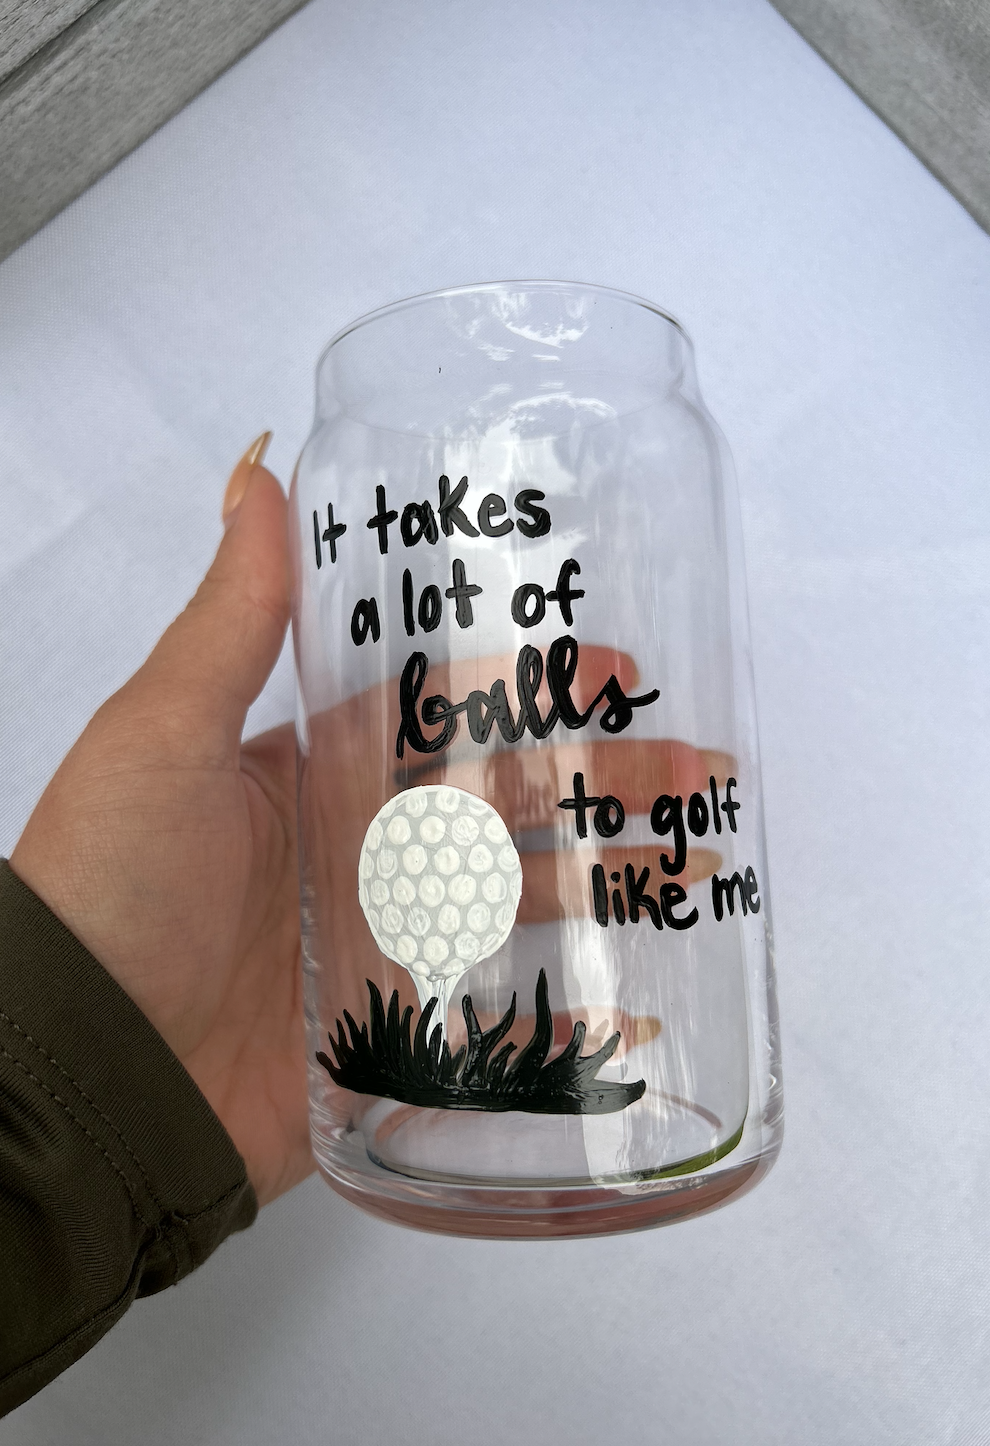 Golf Beer Glass | It takes a lot of Balls to golf like me